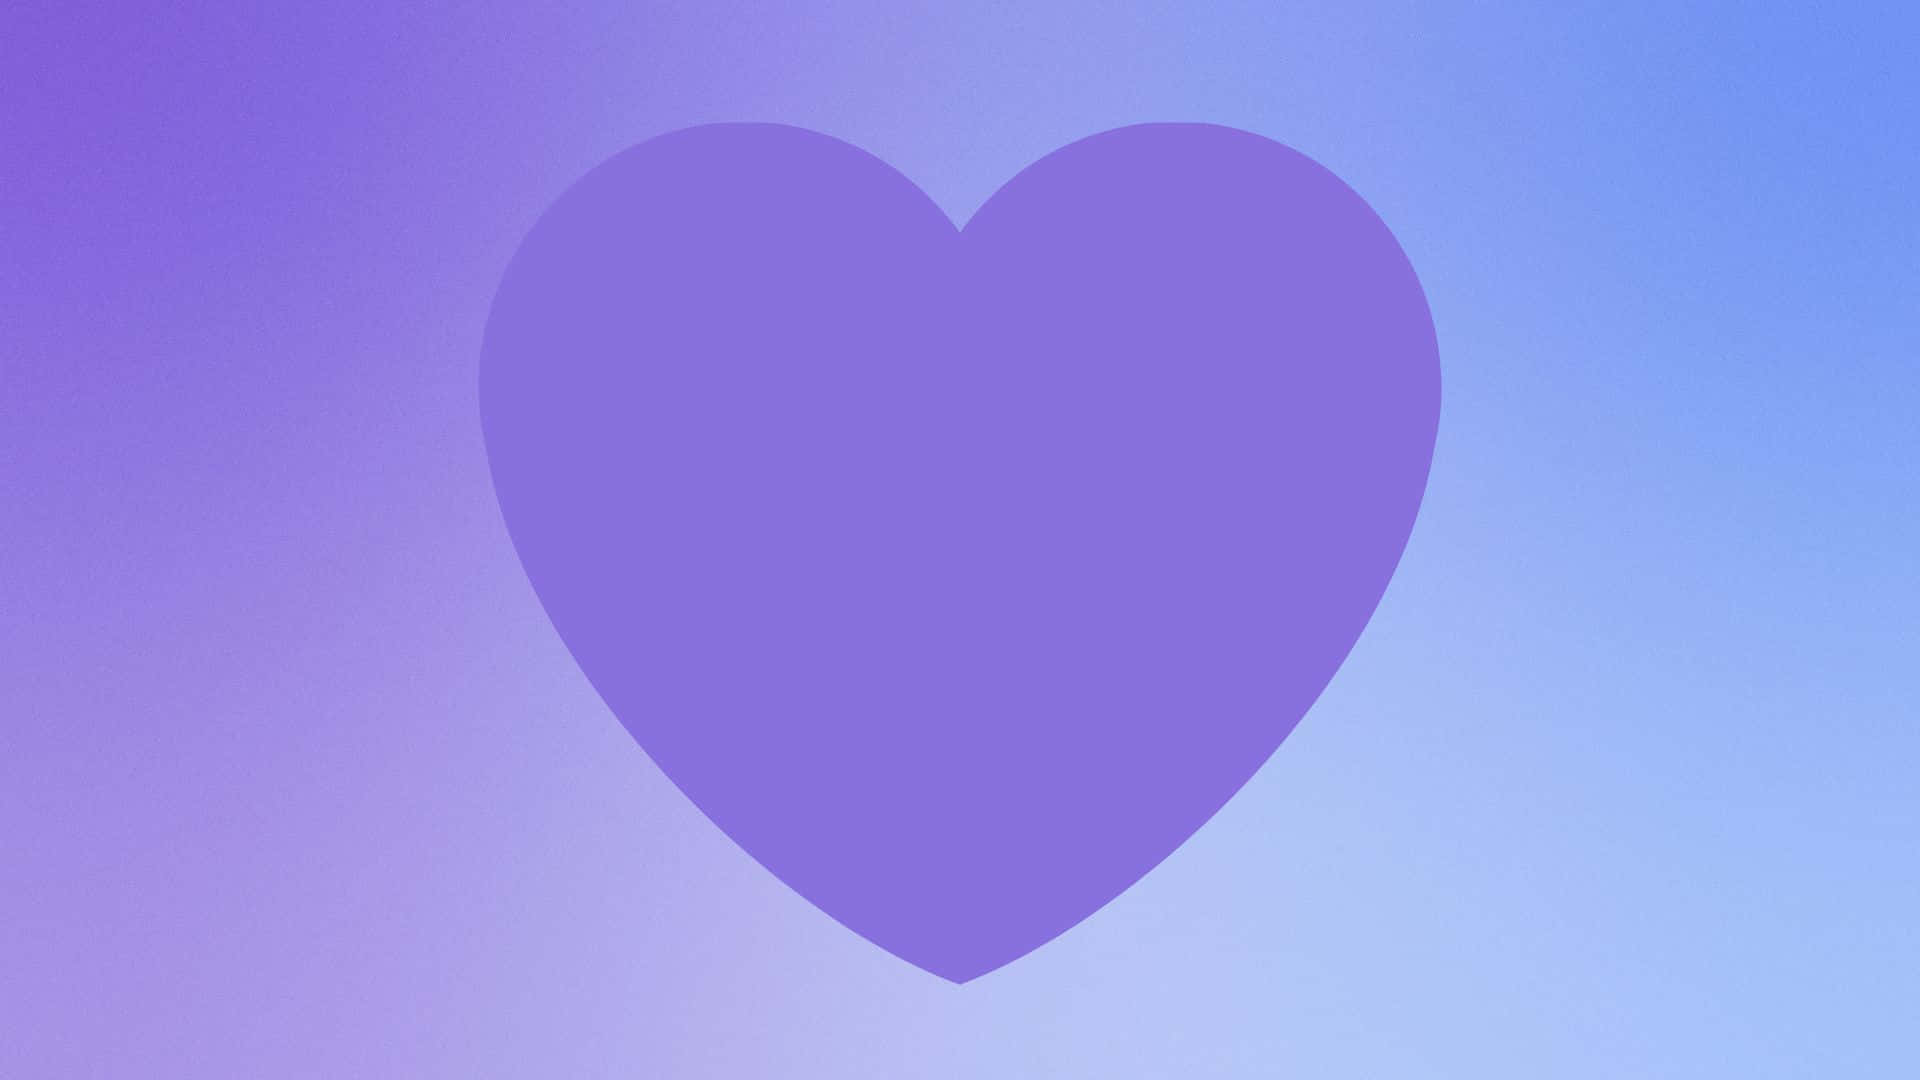 A Purple Heart in honor of the veterans who gave the ultimate sacrifice